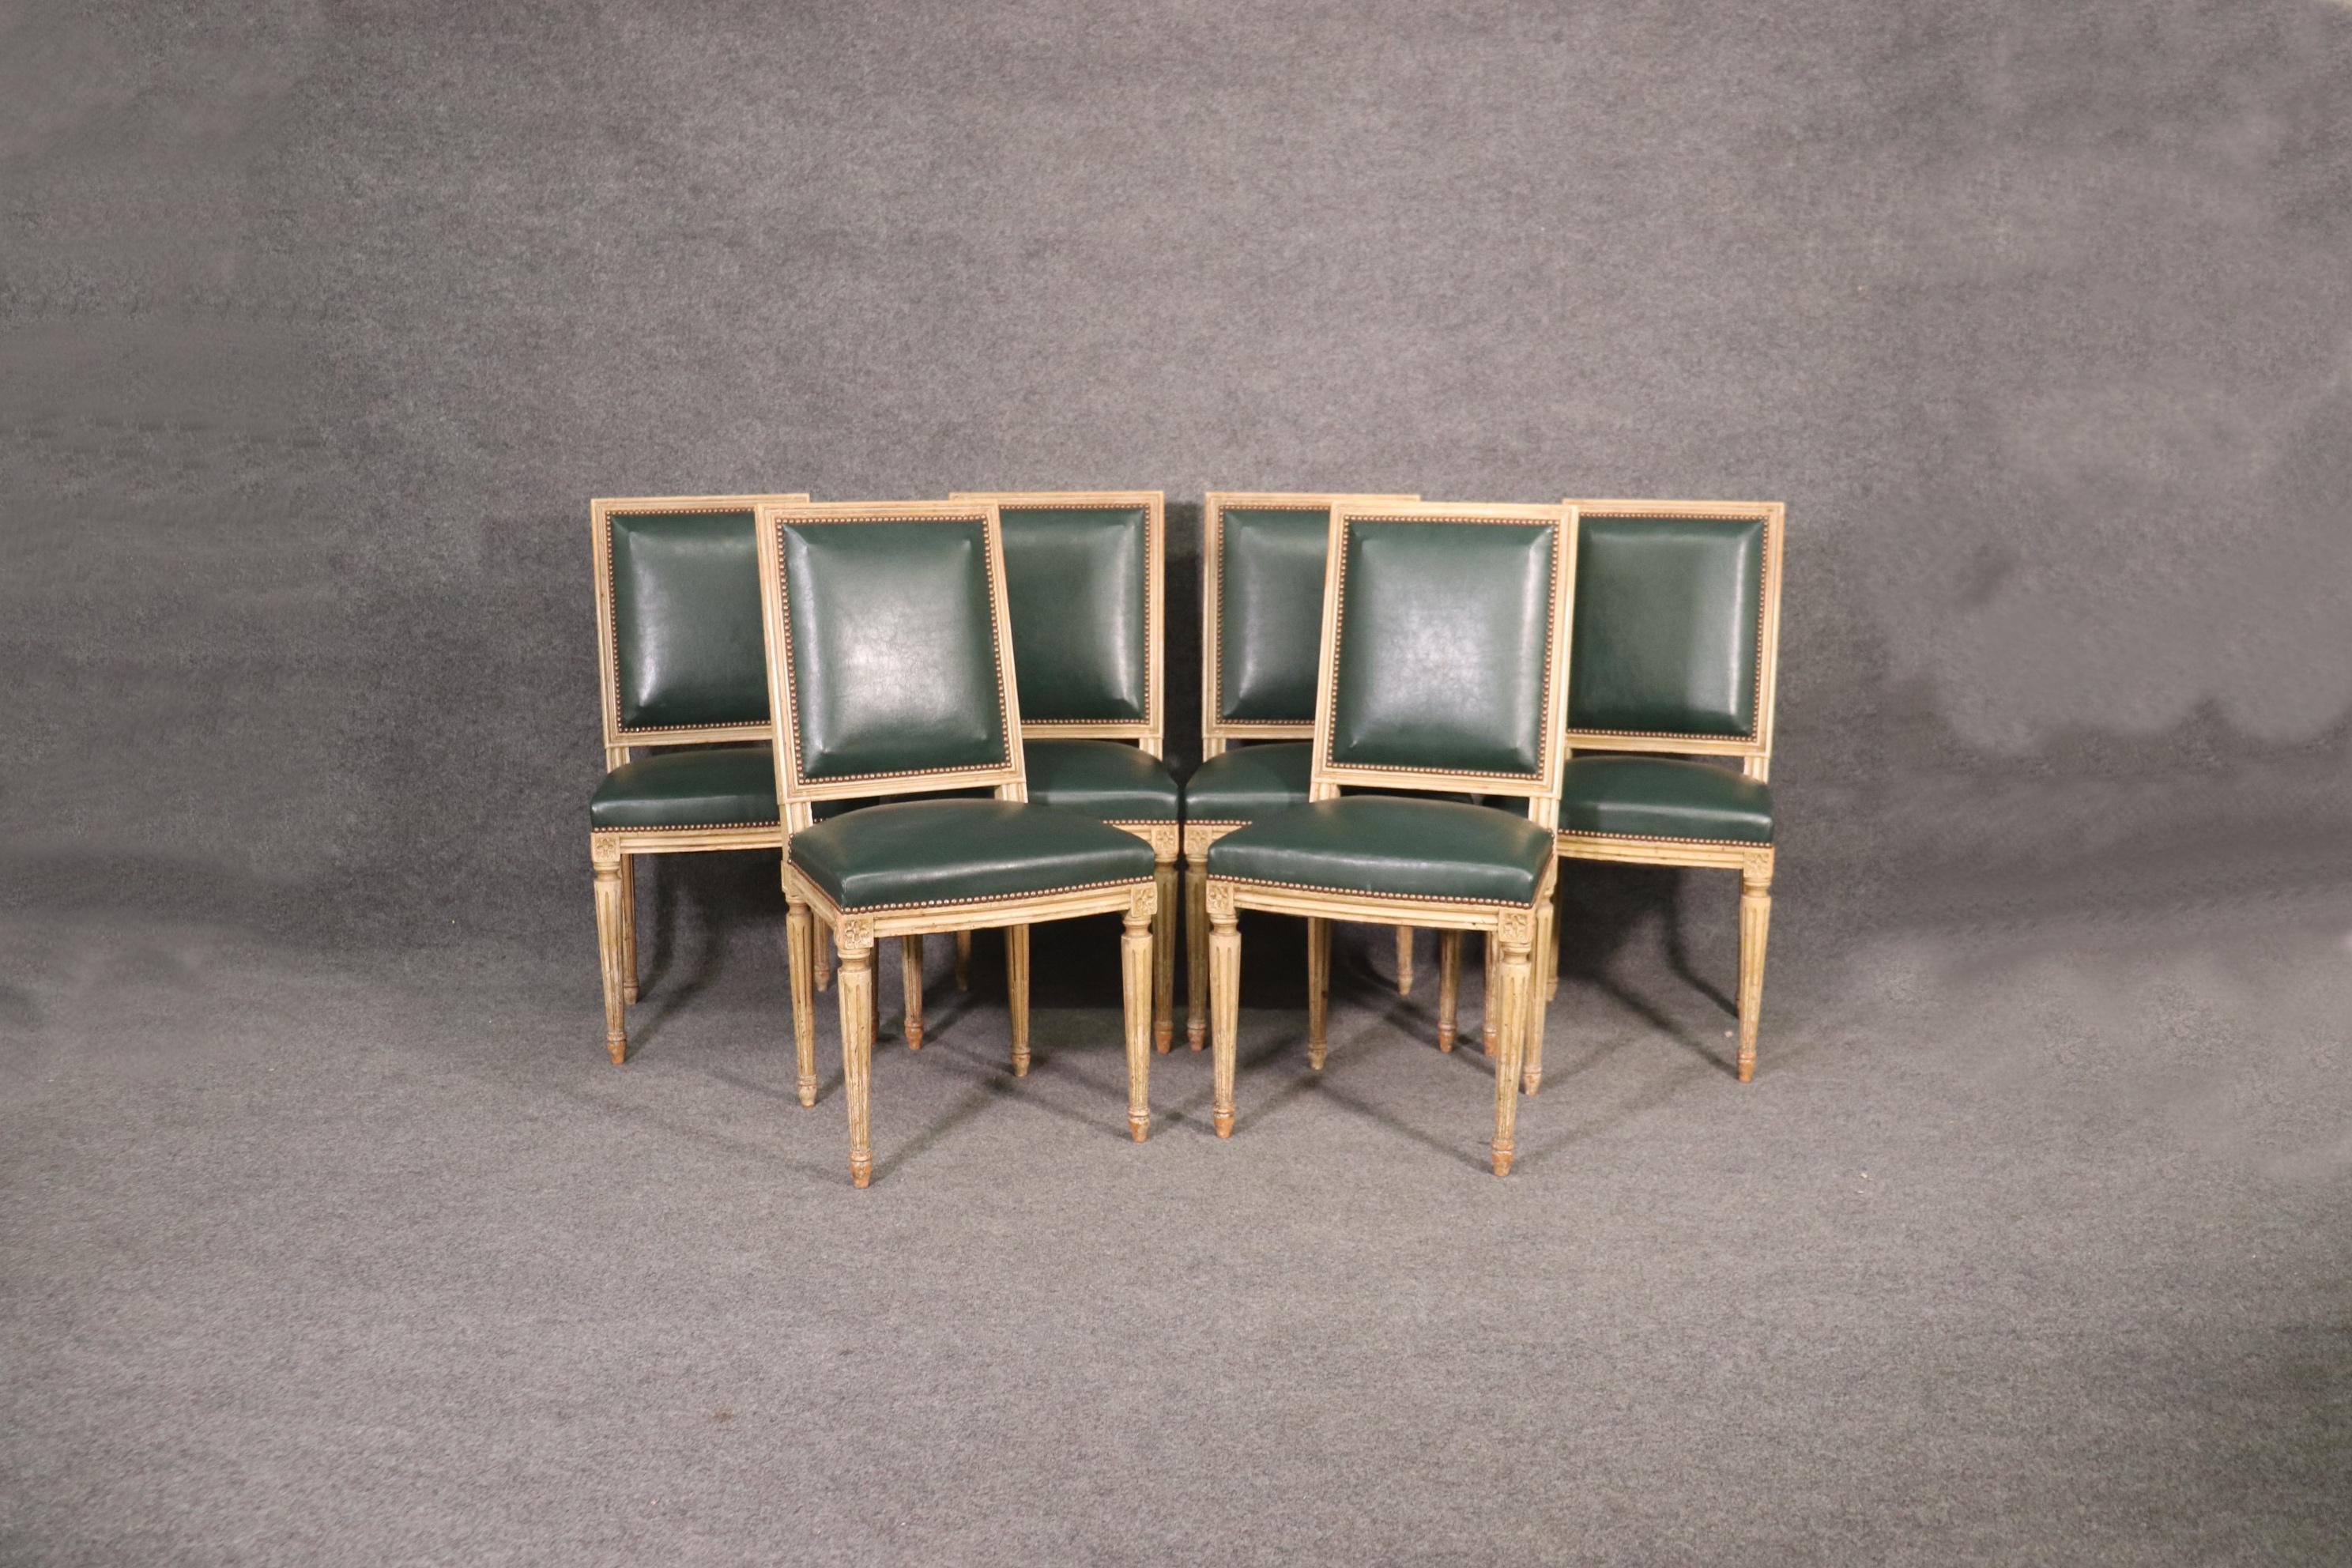 This is an exceptional Set of Louis XVI style 19th Century Dining Chairs Attributed to Maison Jansen! These dining chairs are made of the highest quality! If you look closely at the photos you can see that the chairs are pegged Which means that at